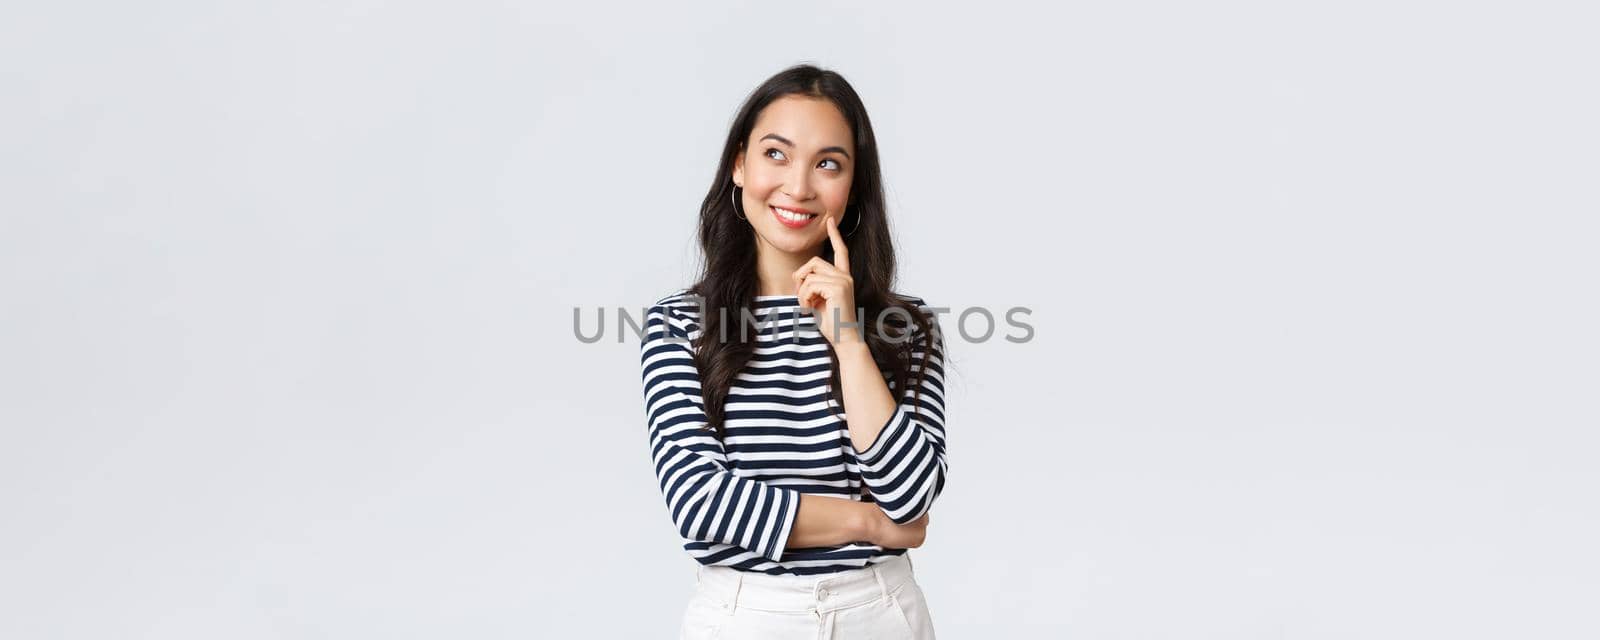 Lifestyle, people emotions and casual concept. Thoughtful stylish young woman smiling pleased, dreaming or imaging perfect plan, have interesting idea, thinking and looking upper left corner.